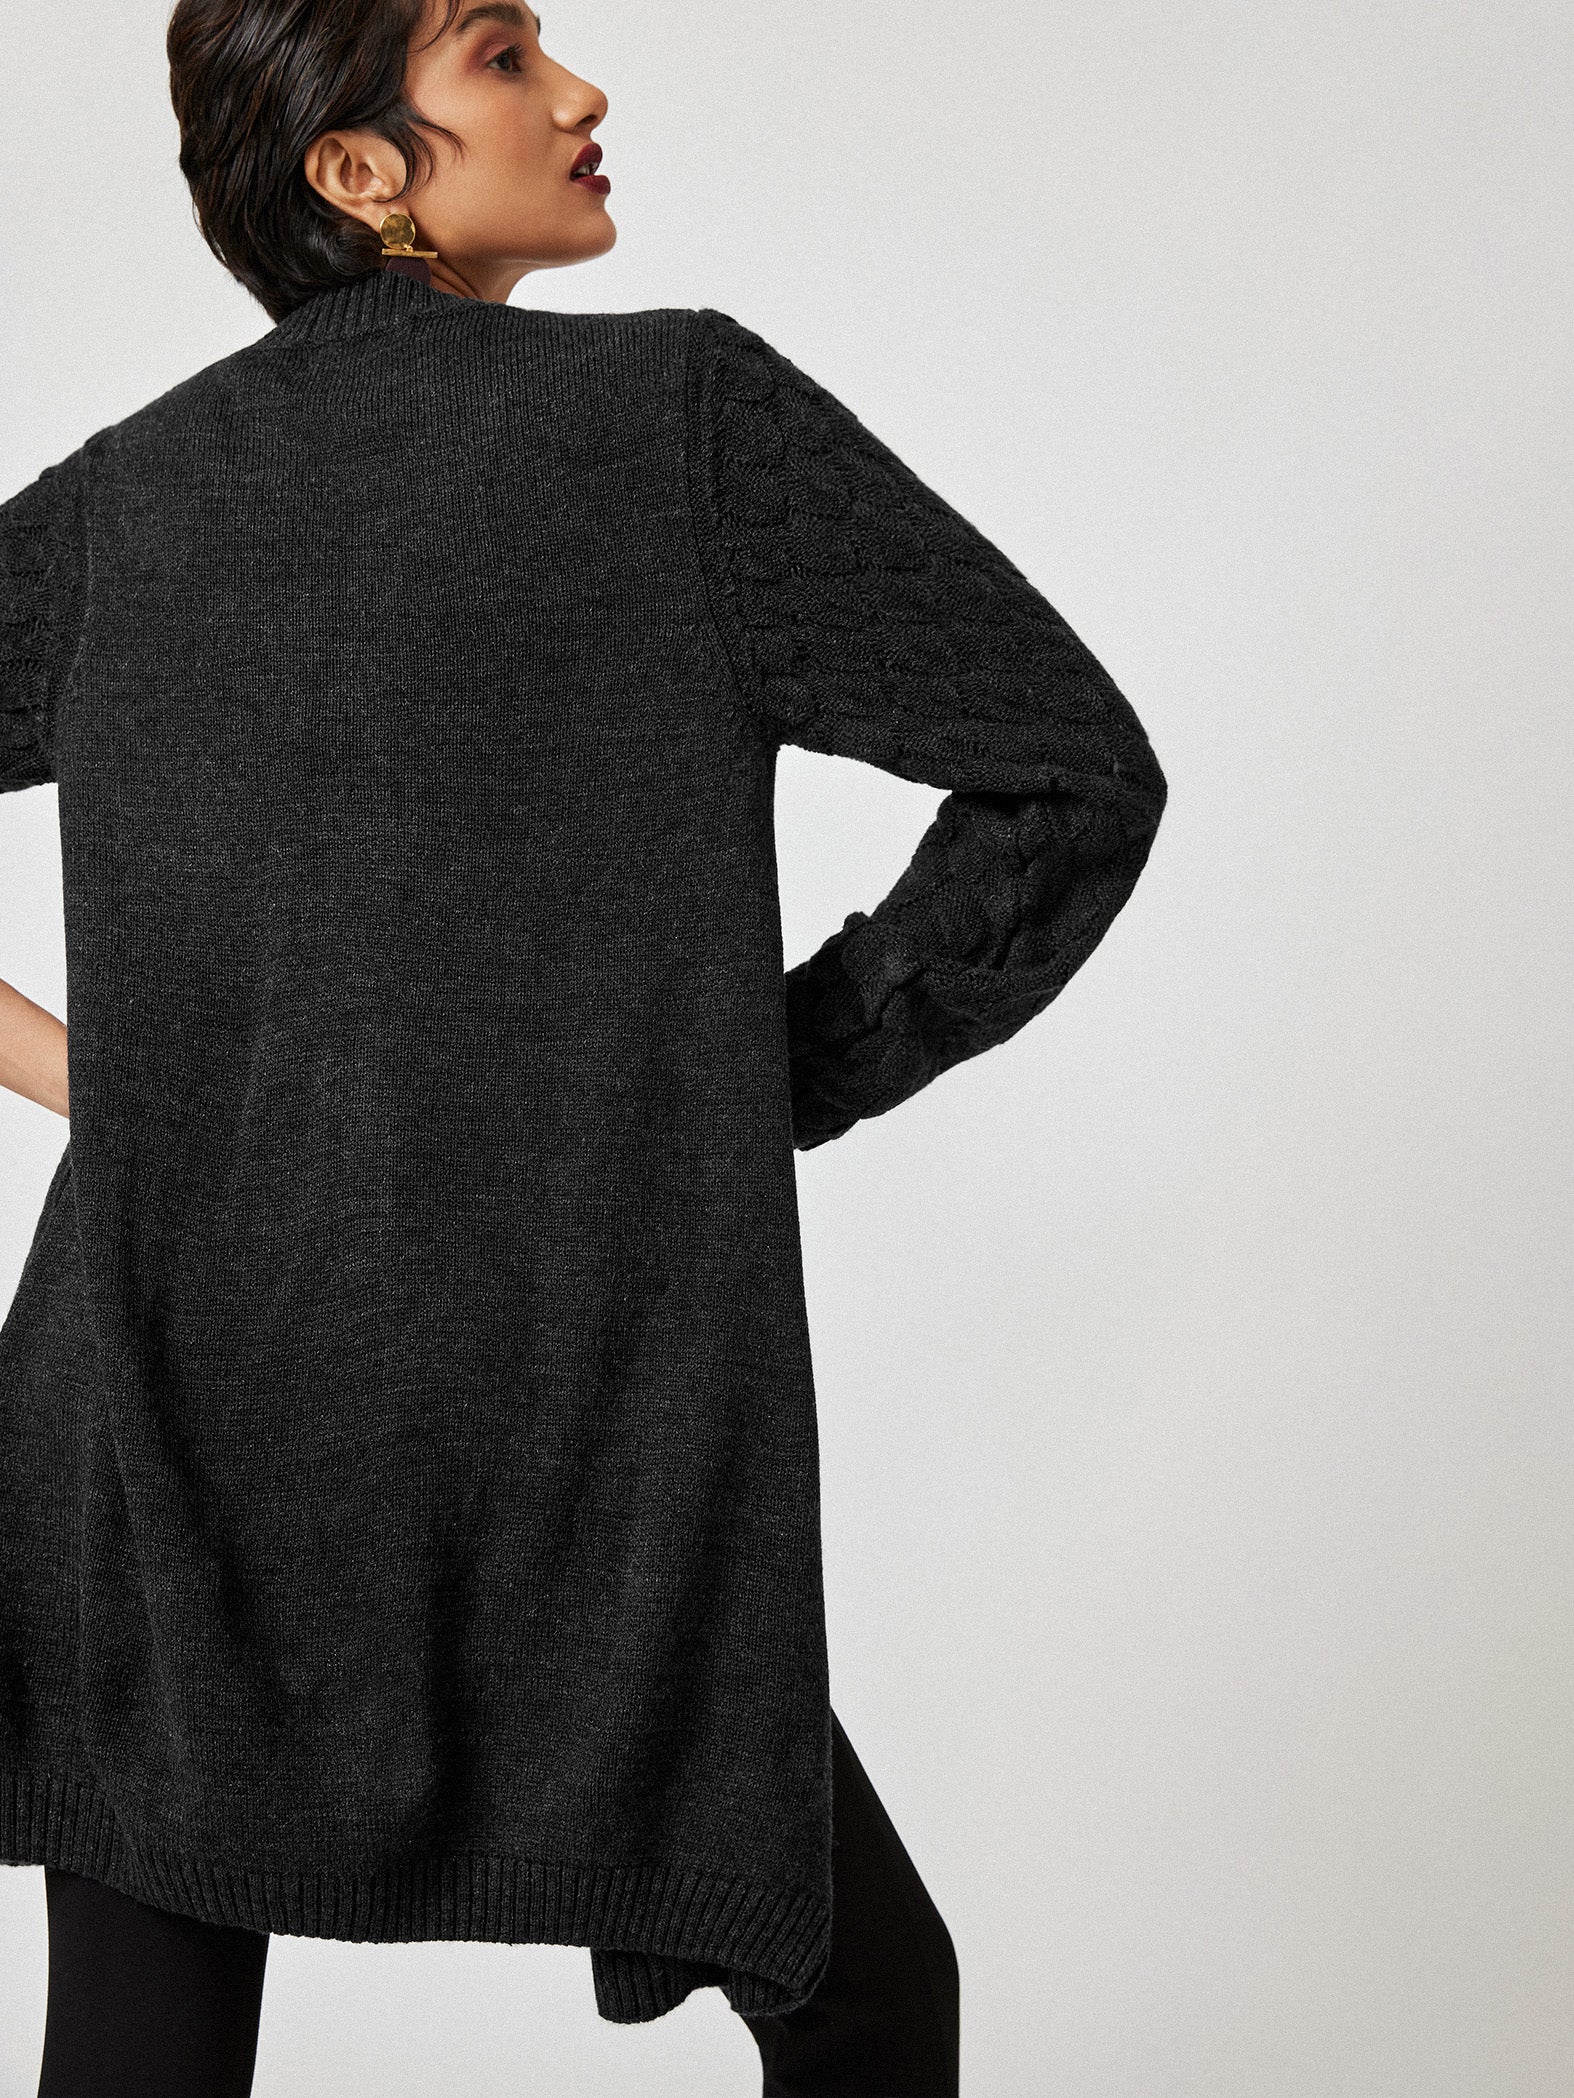 Black Long Cable Knit Cardigan